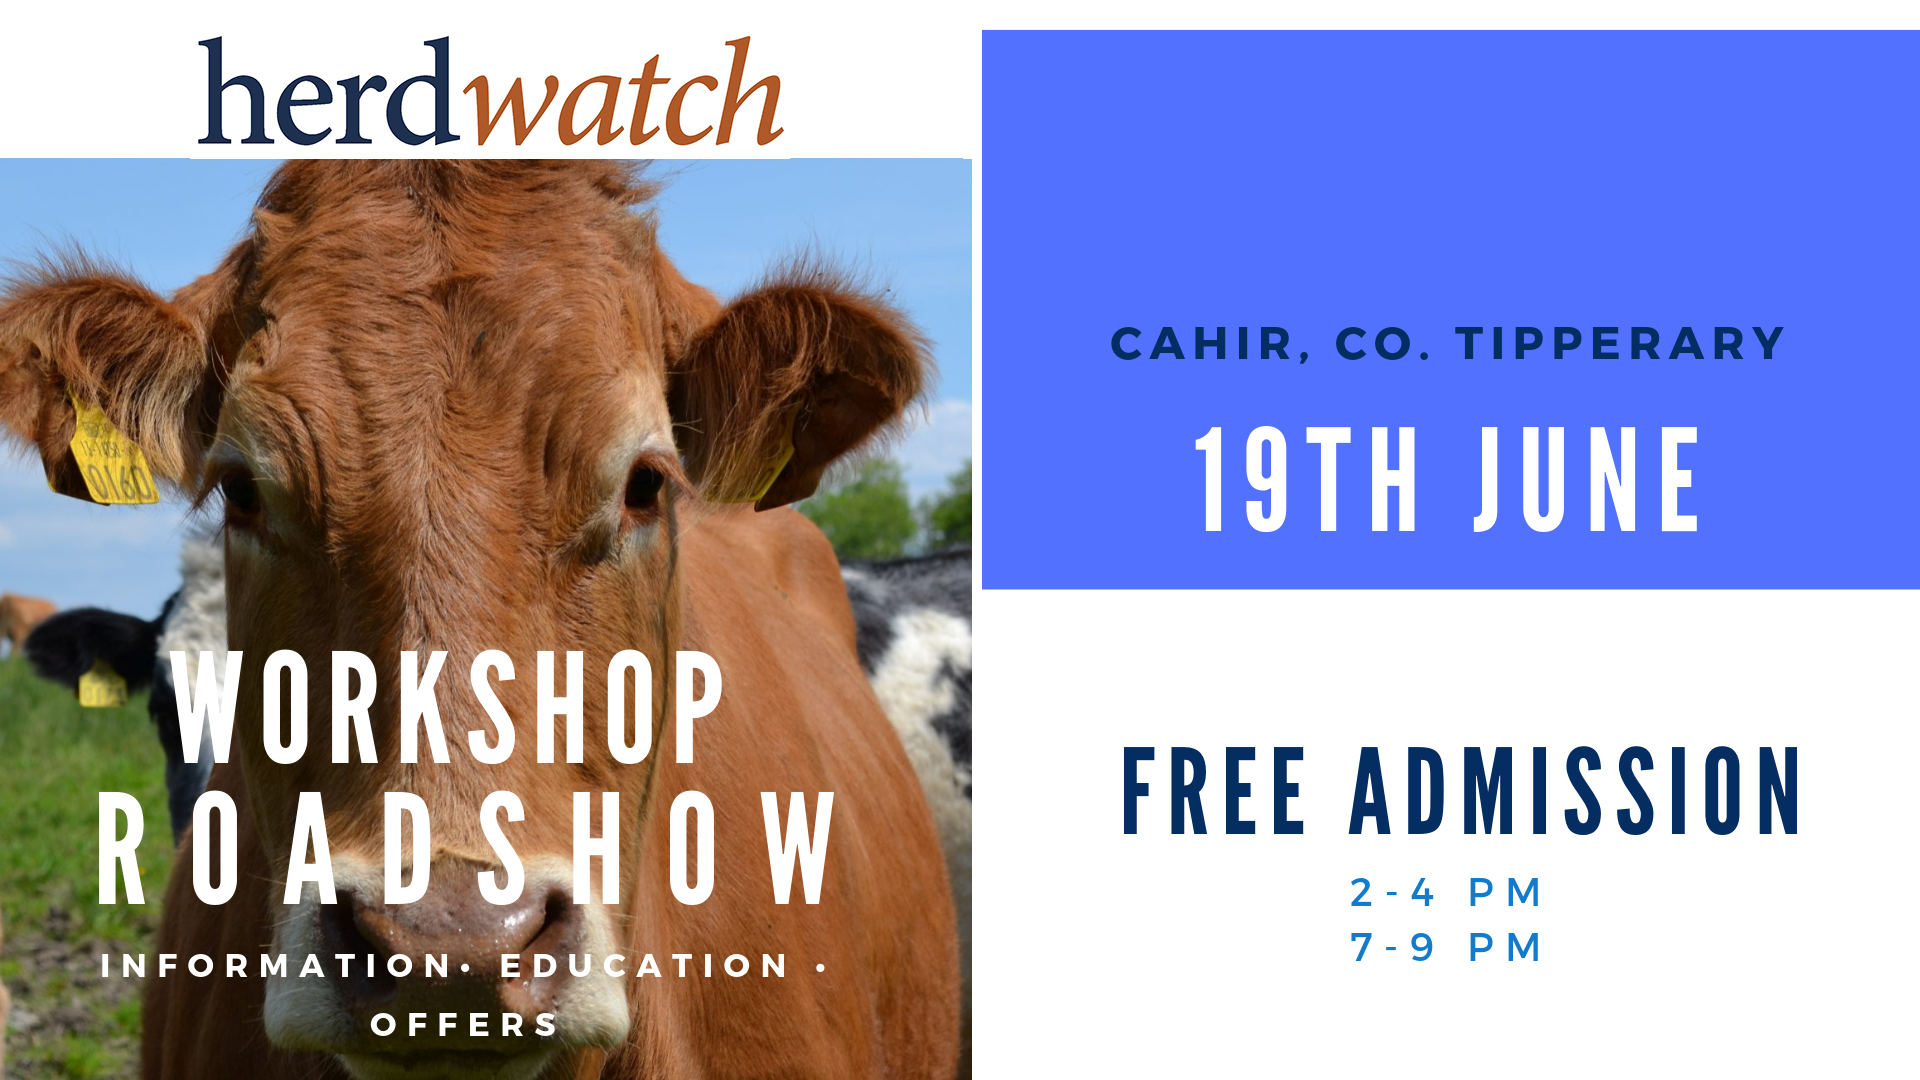 Herdwatch Roadshow poster old logo